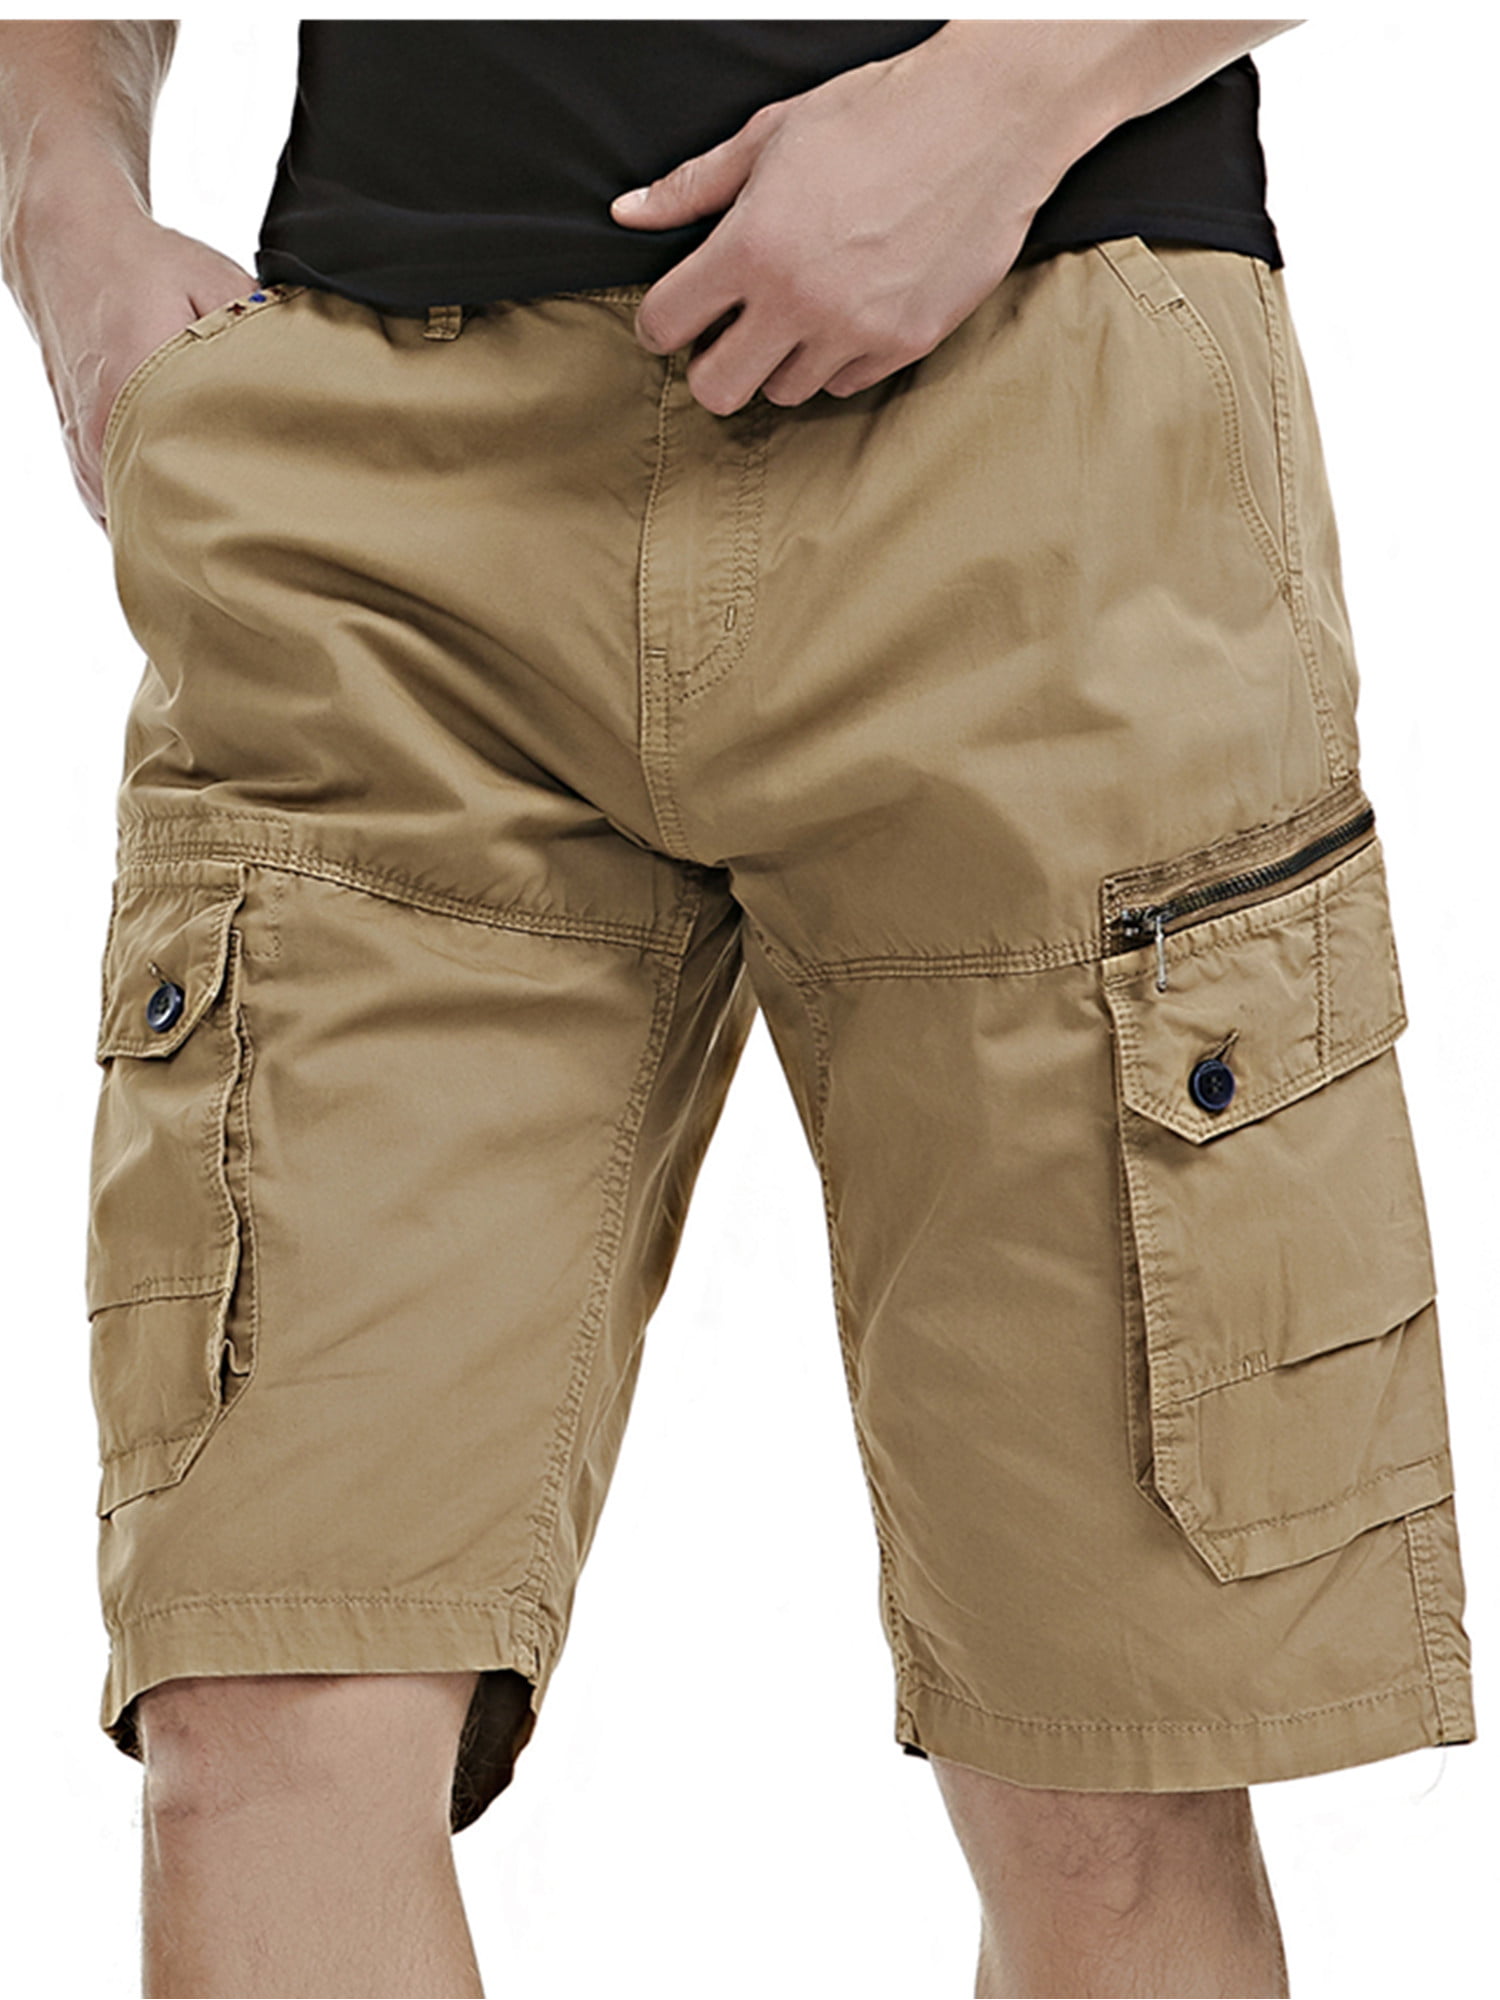 HISEA Mens Tactical Cargo Shorts Breathable Water Resistant Work Hiking Shorts with 8 Pockets